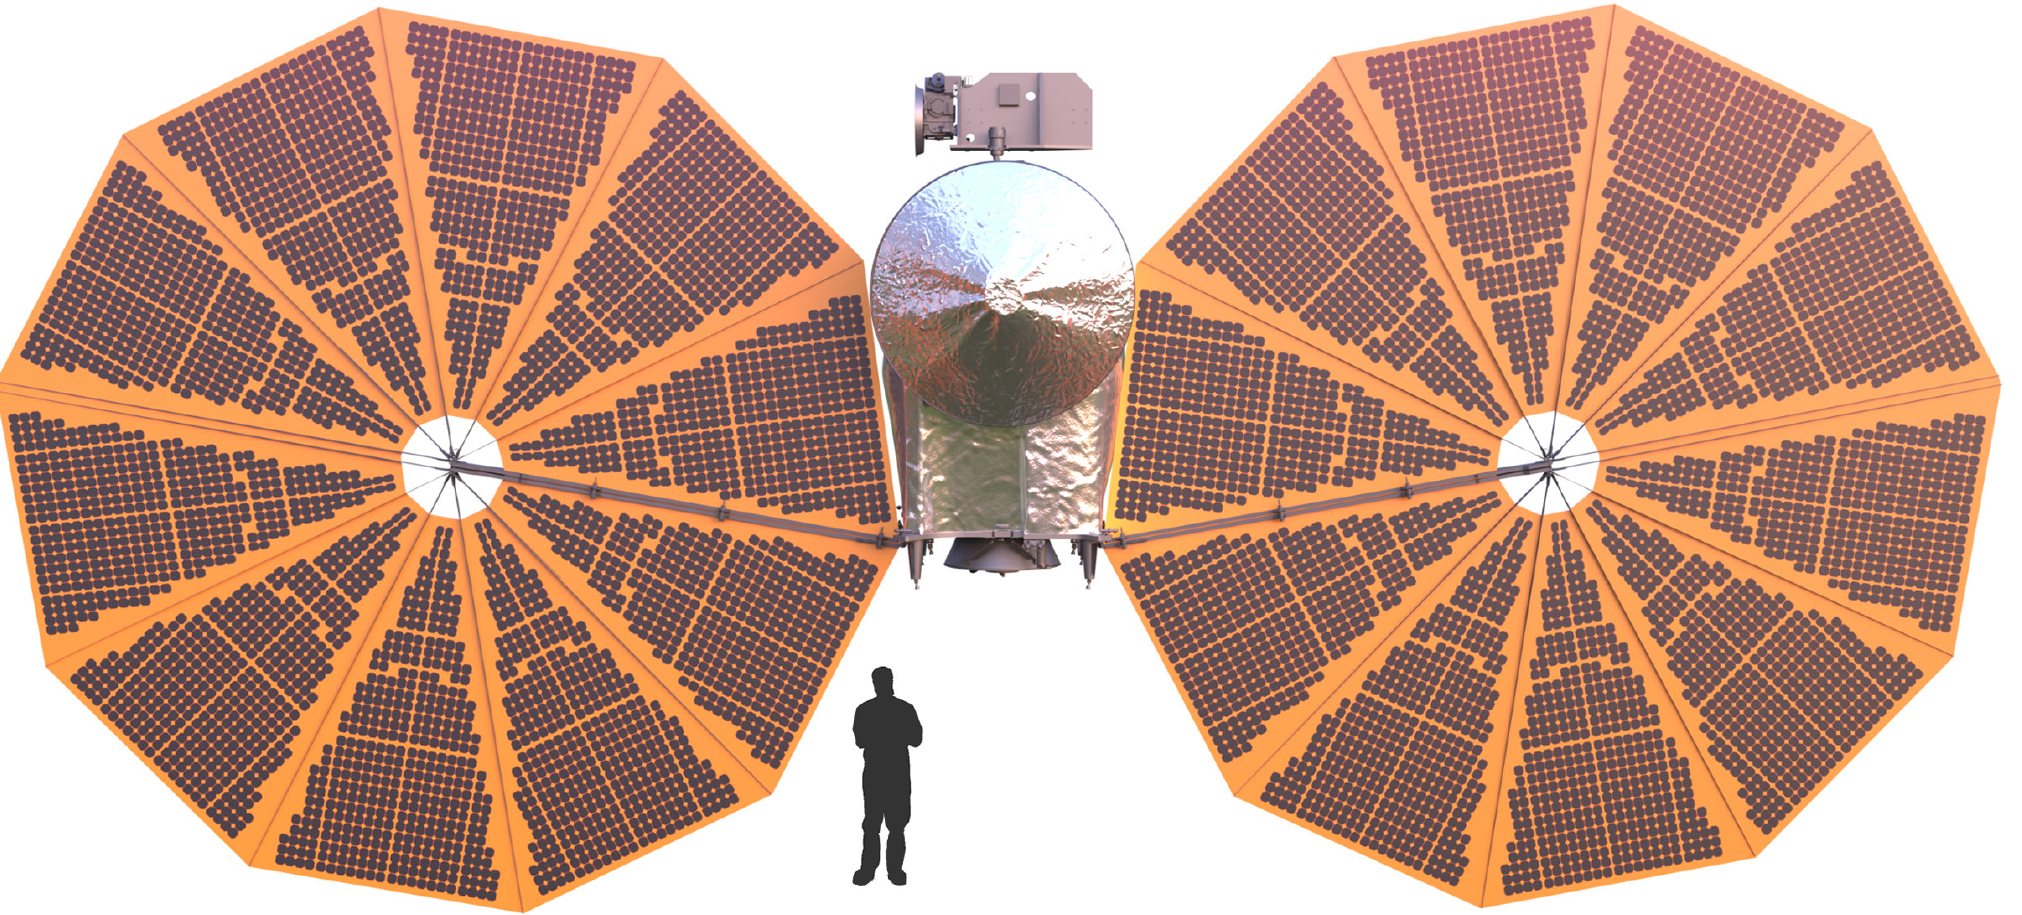 This illustration shows the Lucy spacecraft to scale of a human. The person is about a third as tall as a solar panel. The spacecraft is more than 50-feet across.